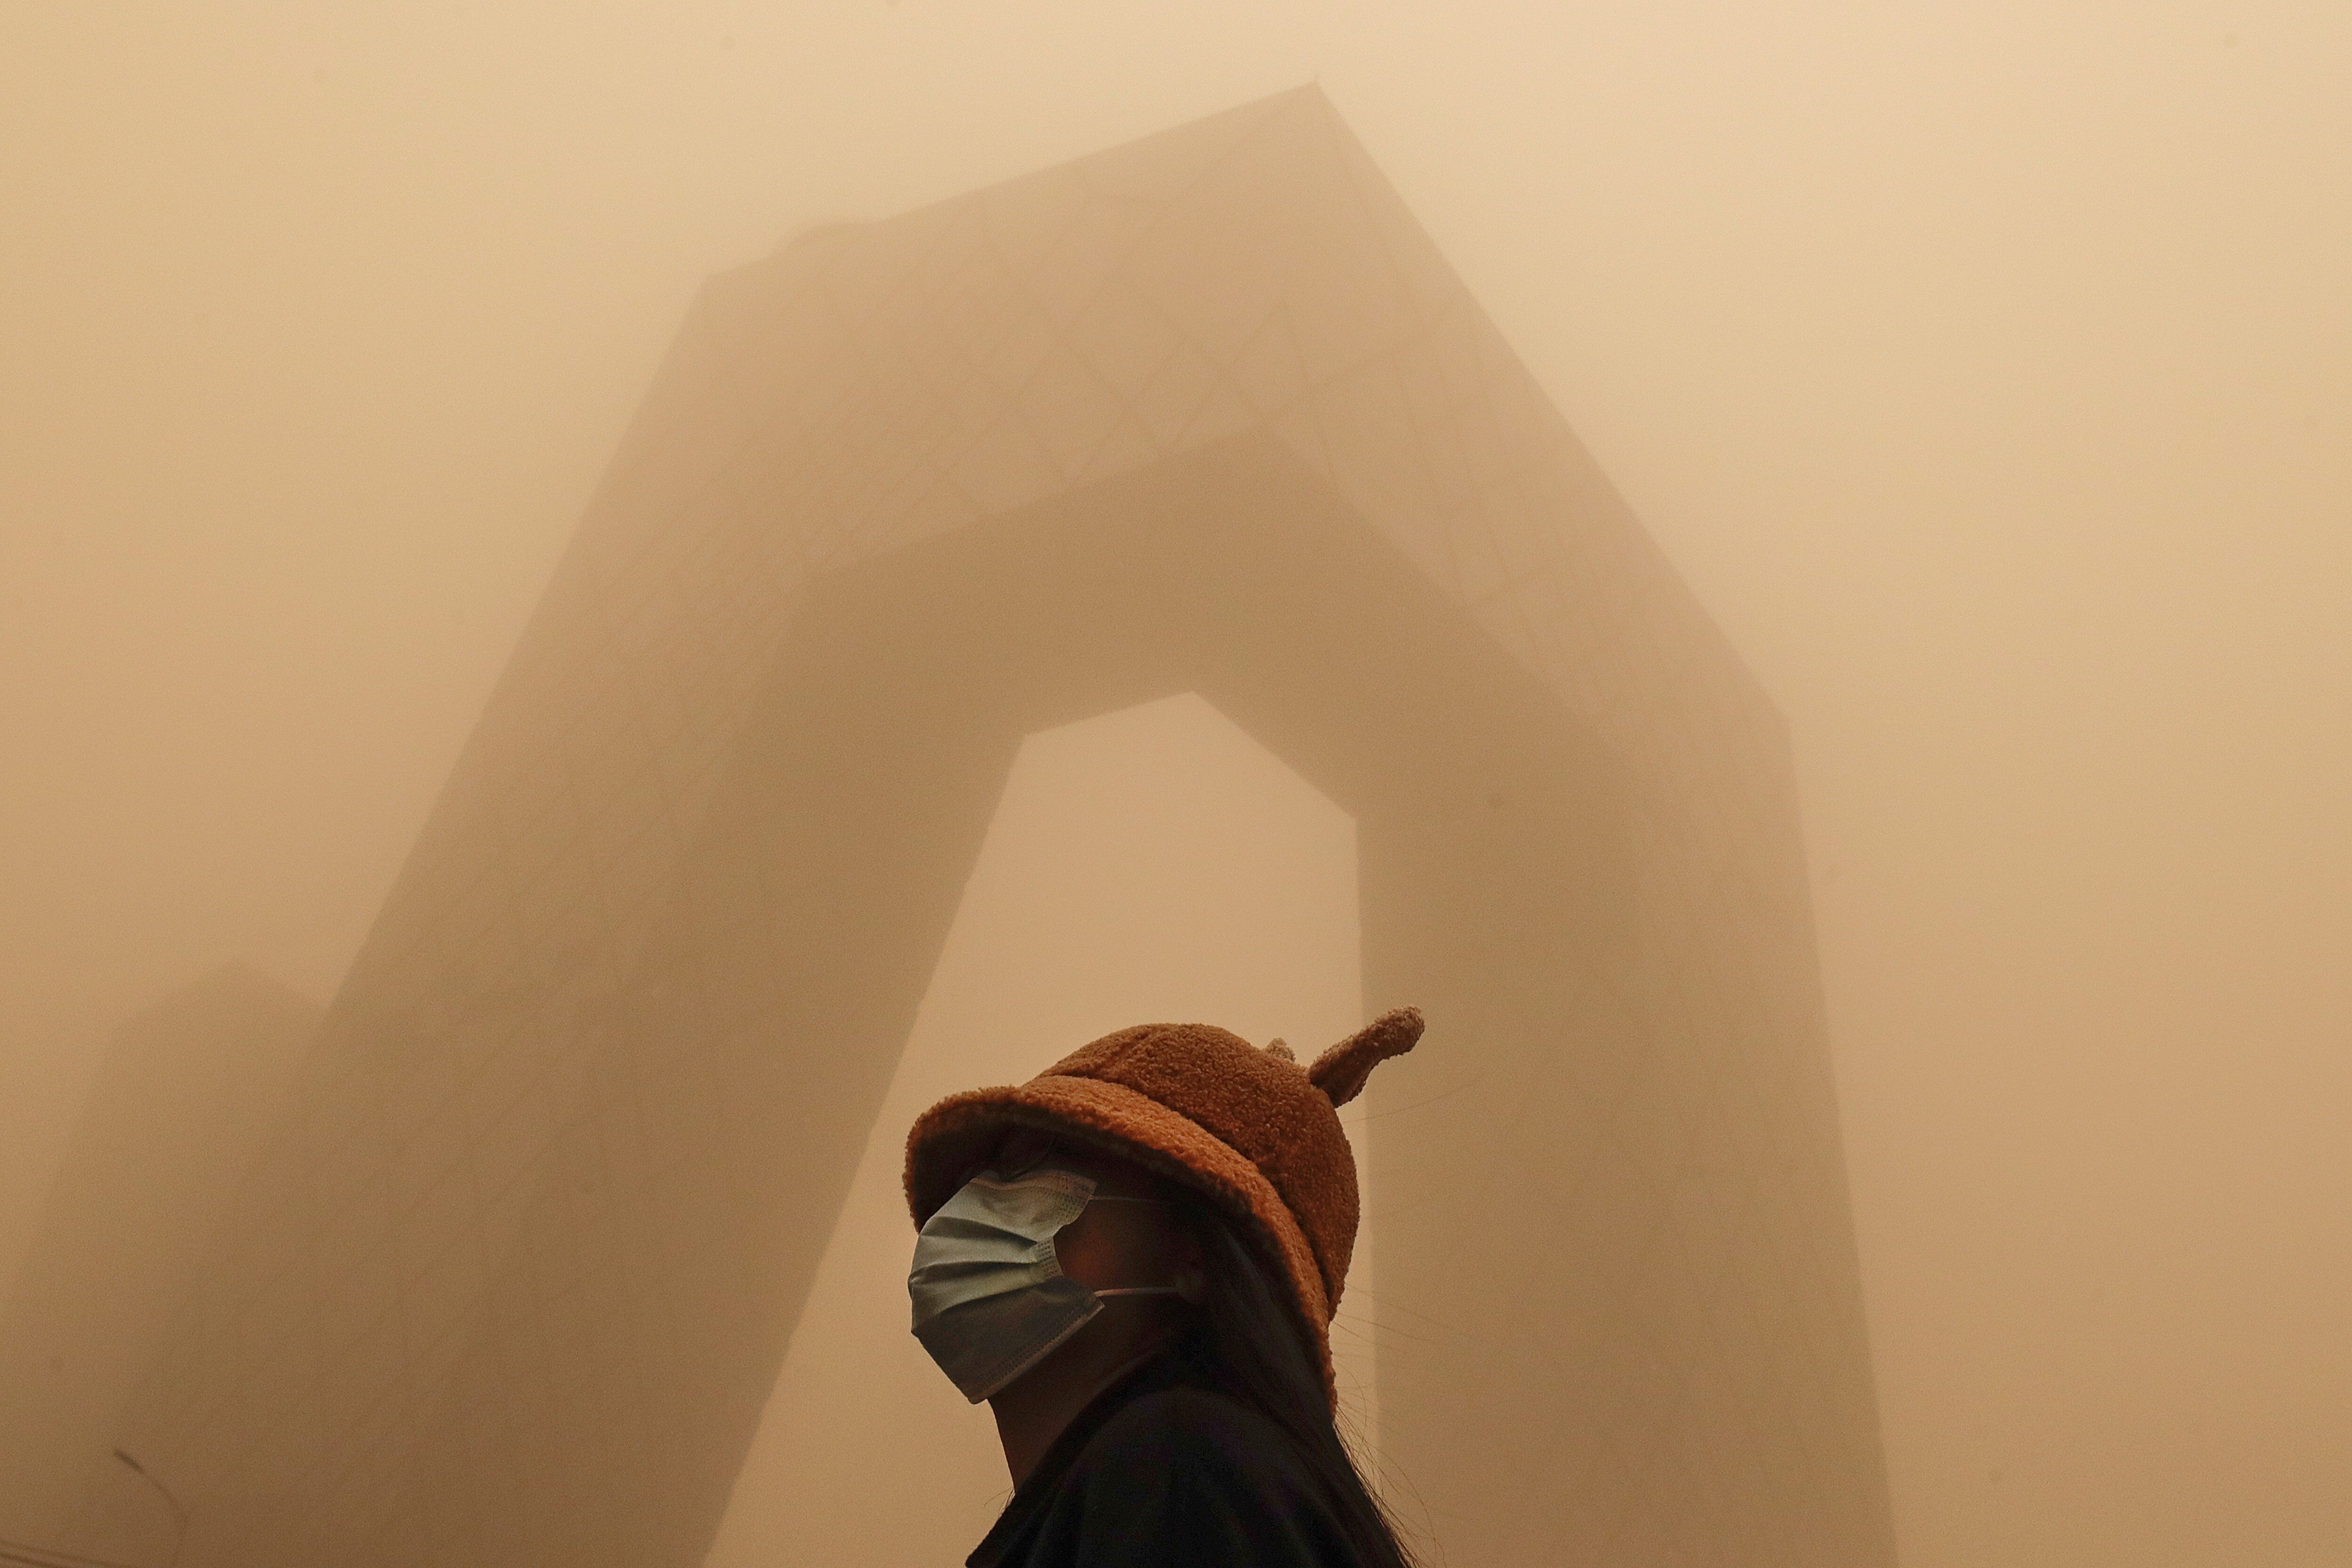 Beijing’s air quality has improved in recent years, but serious health concerns remain. Photo: AP